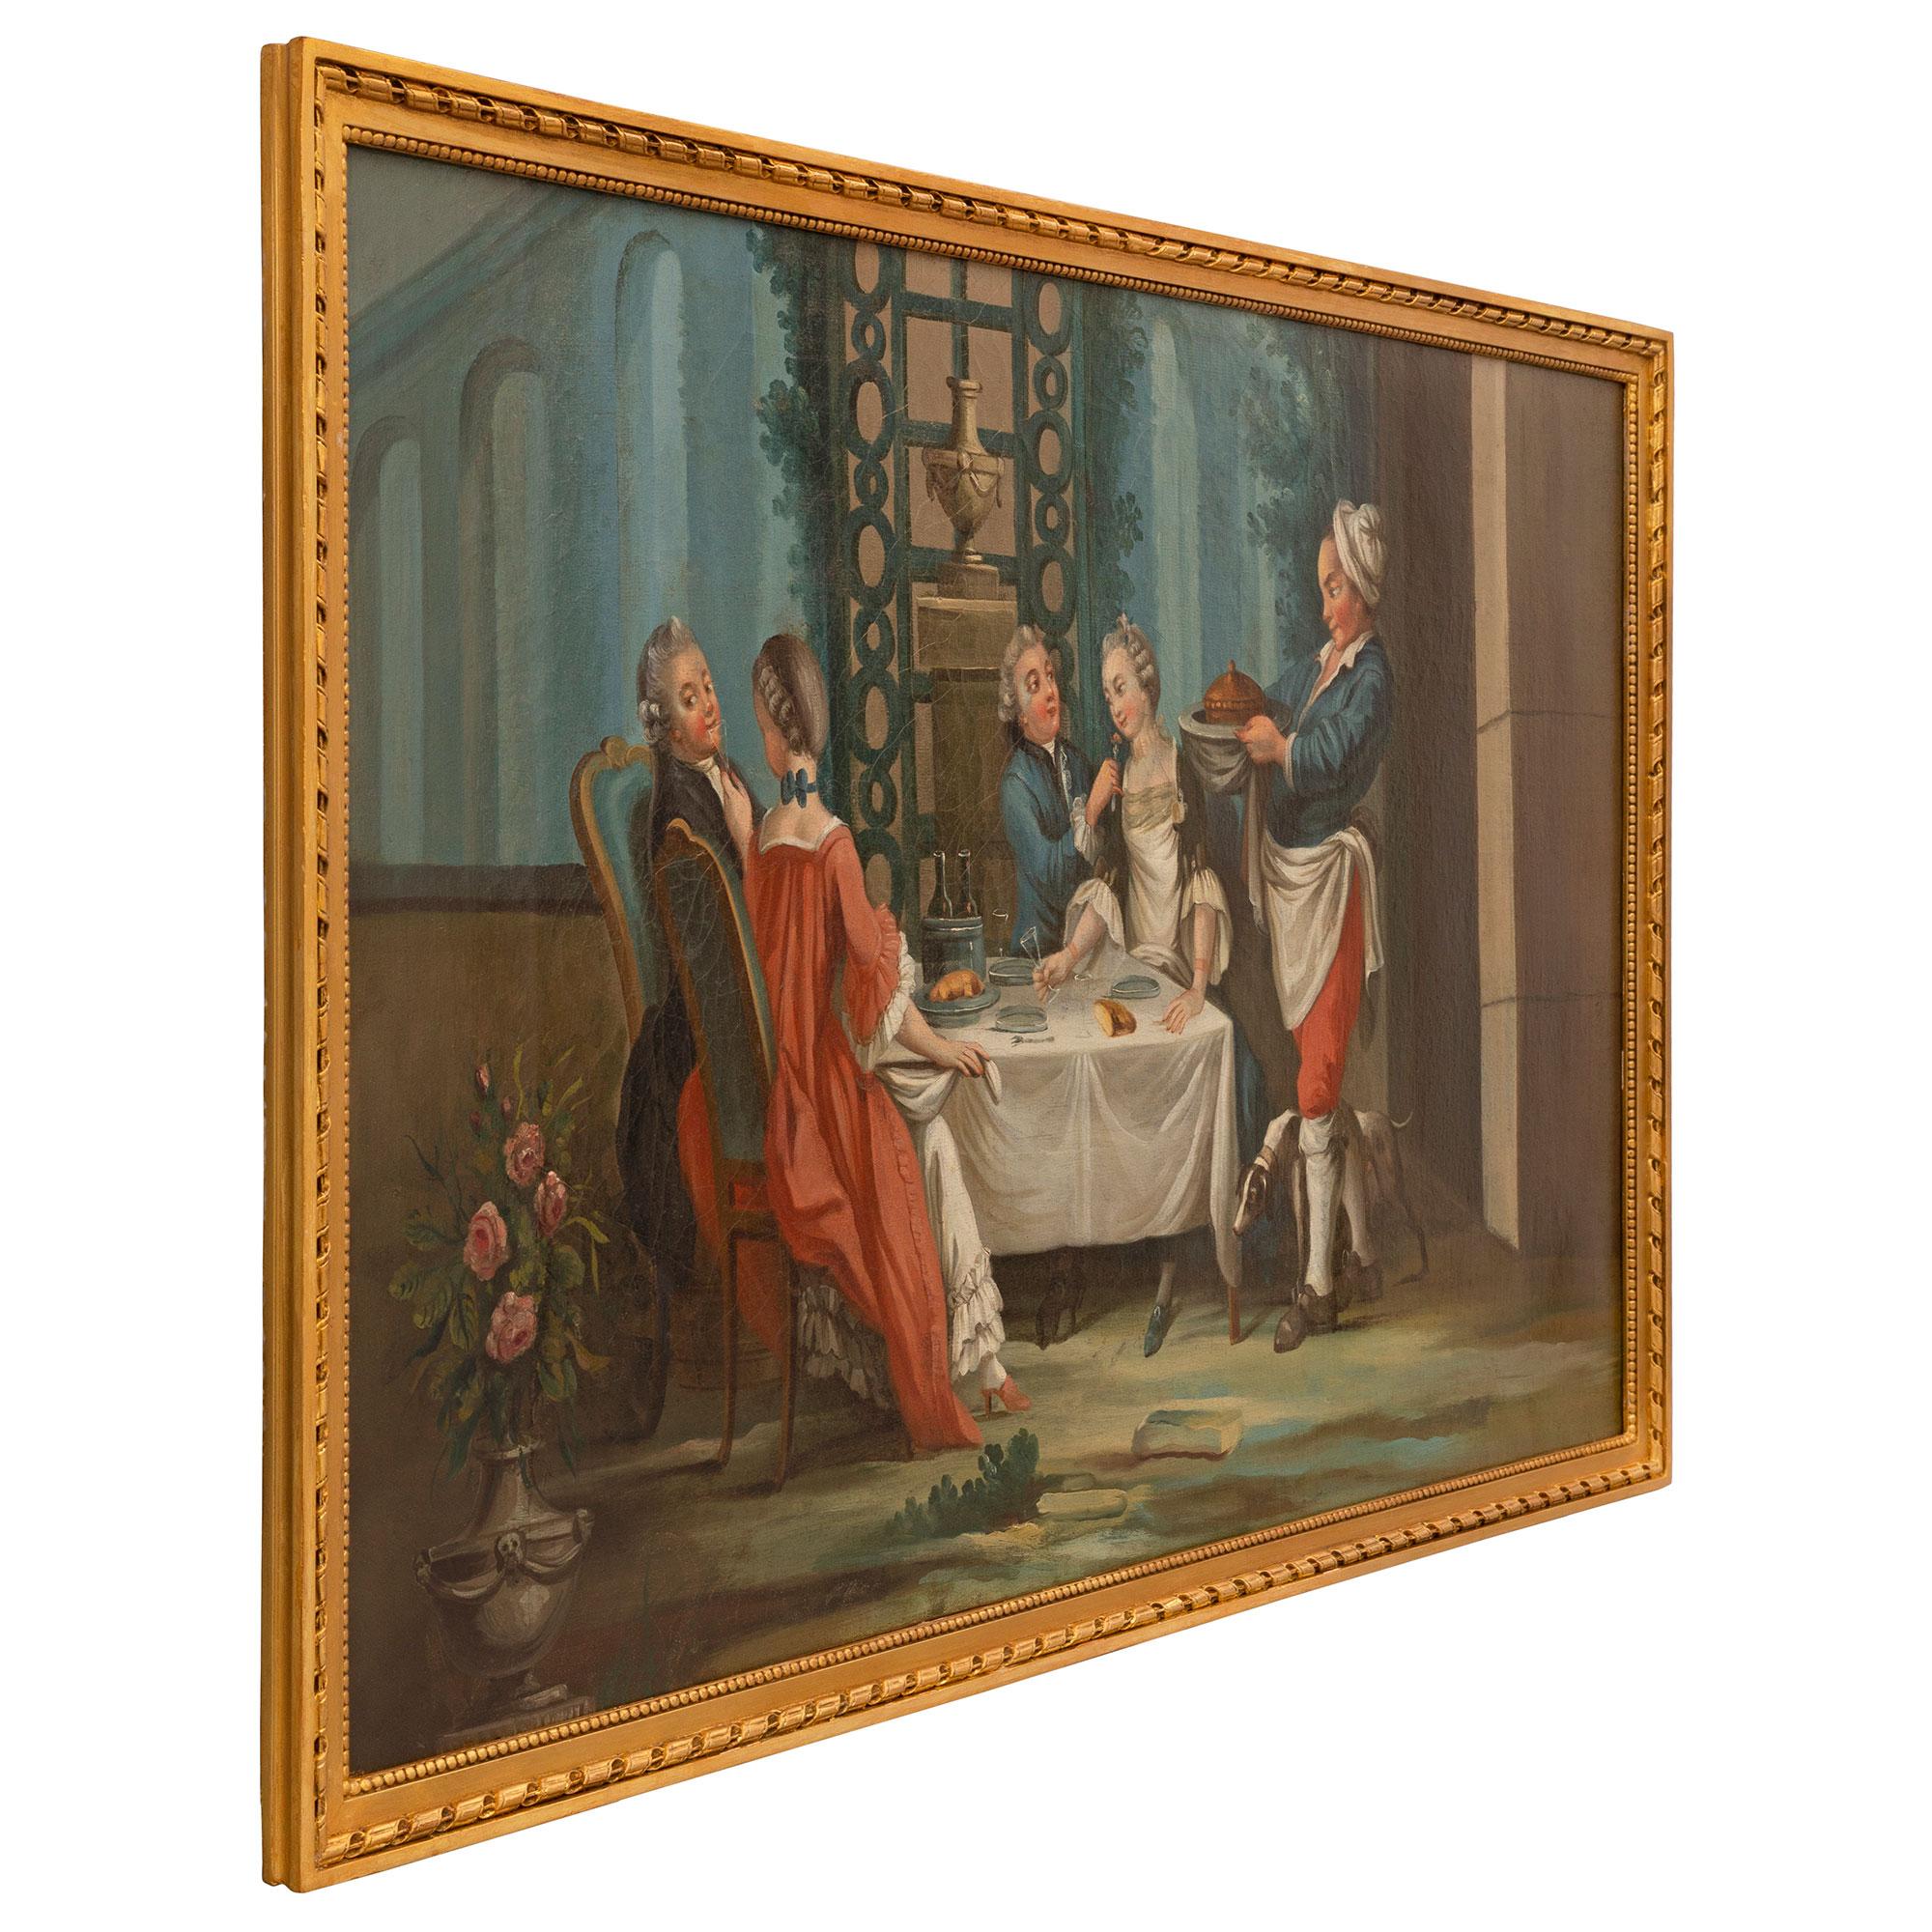 A wonderfully executed Continental 19th Century oil on canvas painting. The painting is set within its original giltwood frame with a most elegant mottled, beaded and twisted rope design. The charming painting depicts two couples sitting at a dining